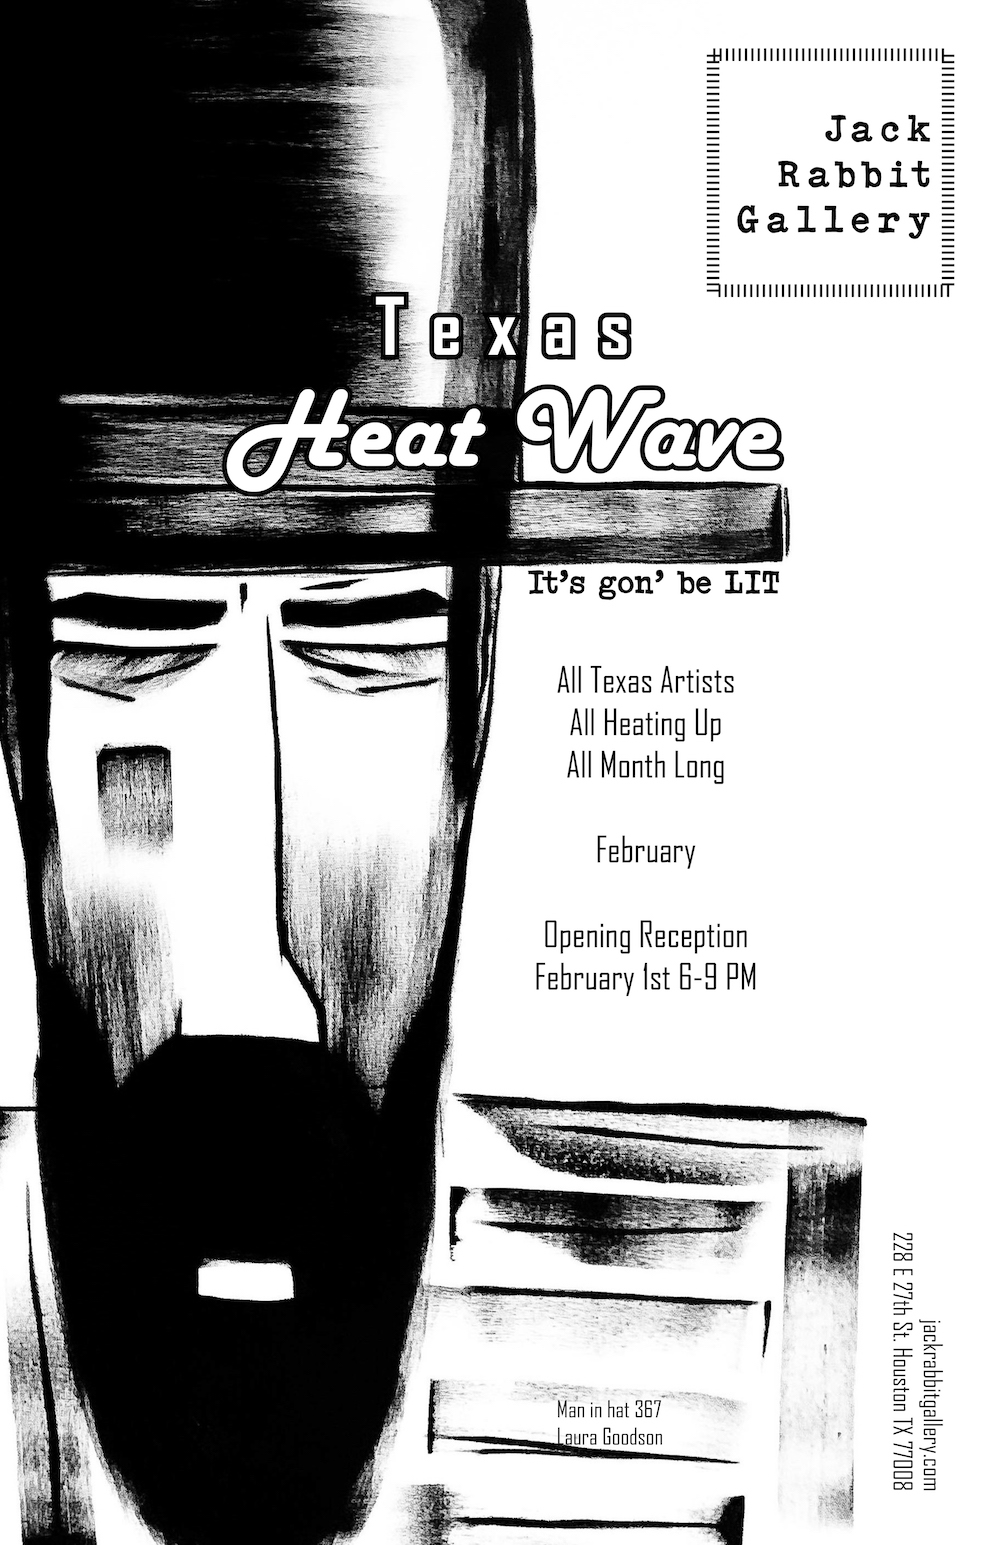 Opening Reception: Texas Heat Wave at Jack Rabbit Gallery